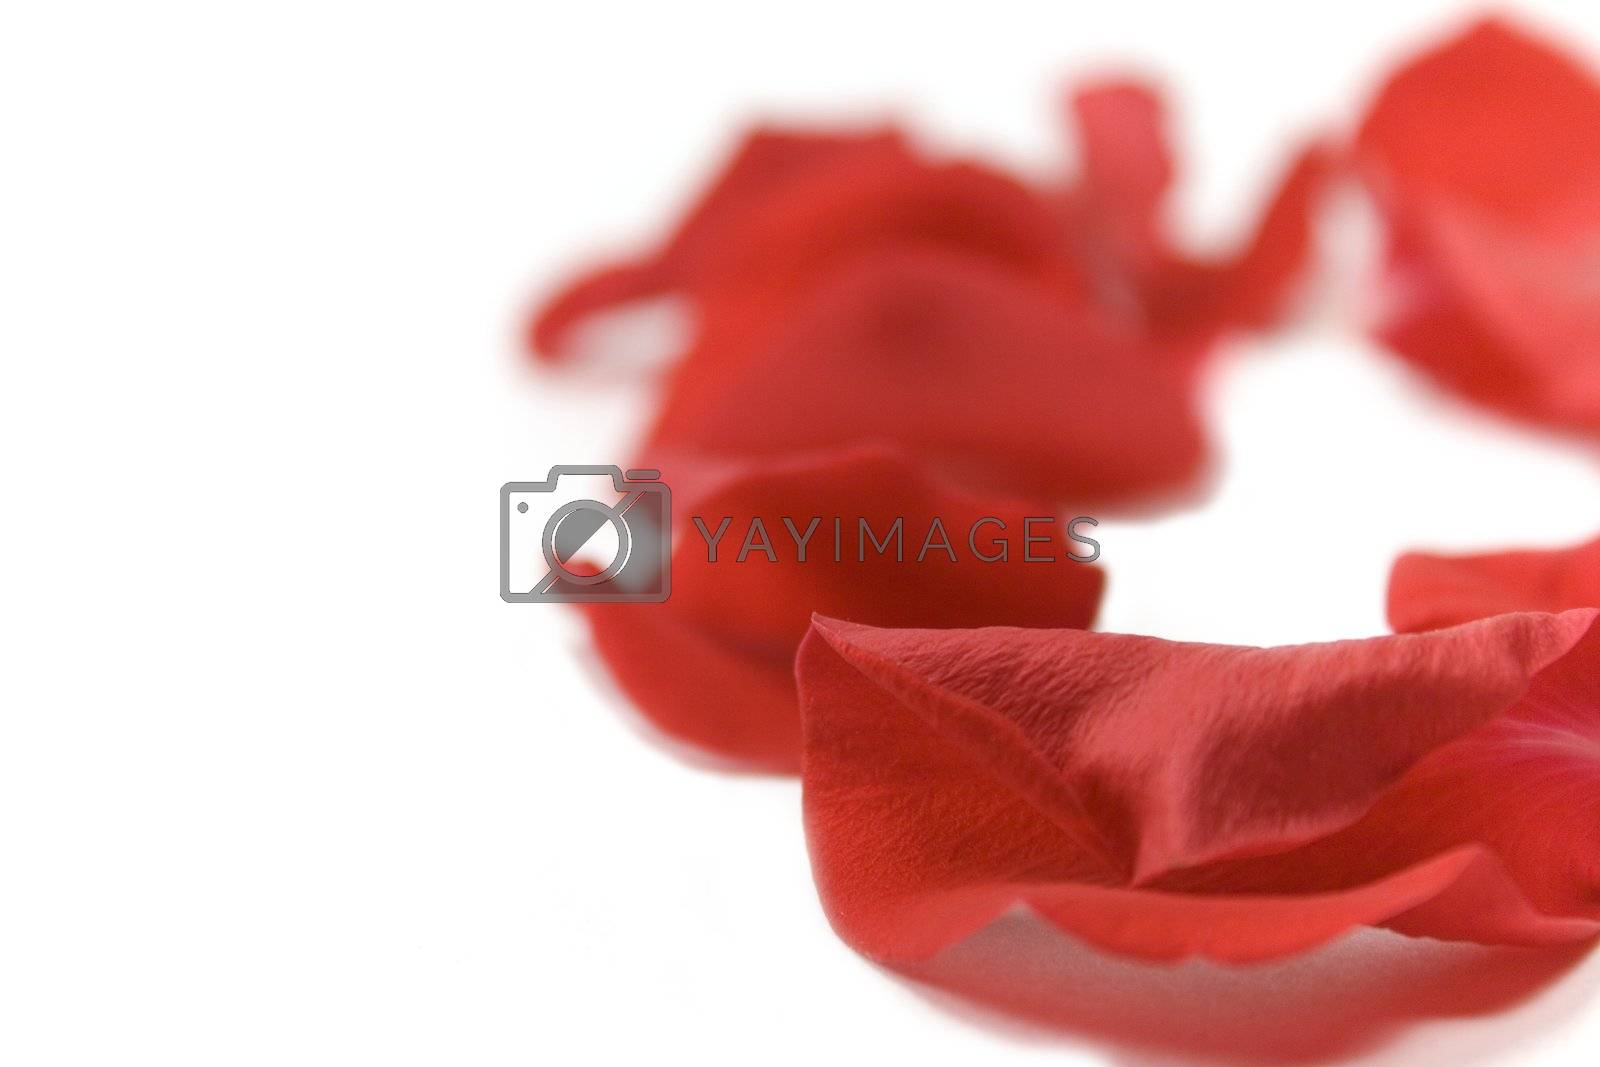 Royalty free image of red petals by marylooo